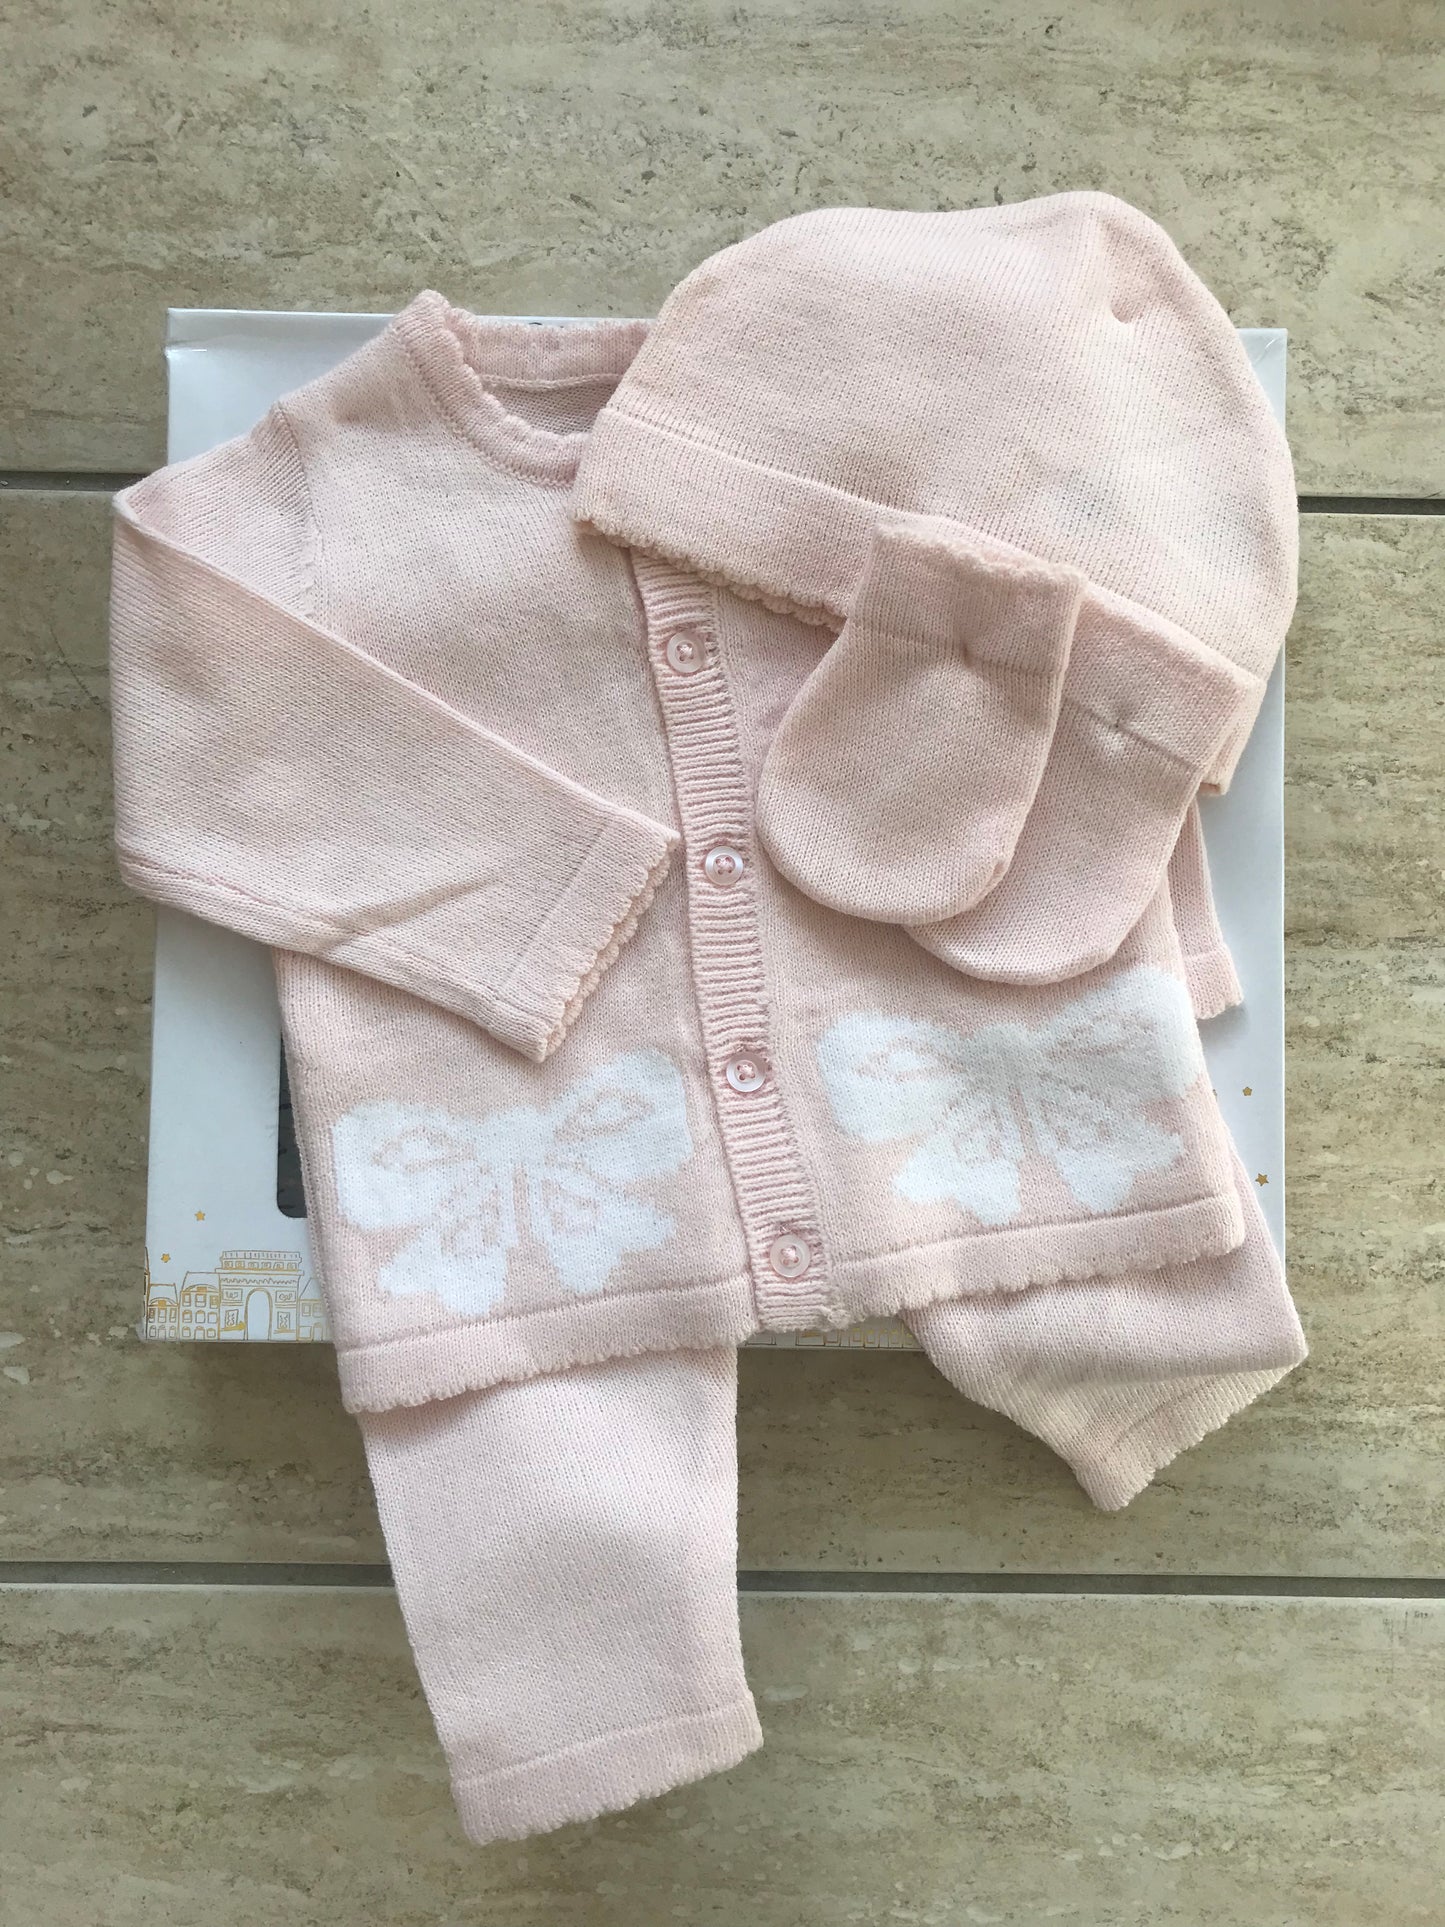 Girl pink knitted style jumper and trousers set with matching hat and mittens